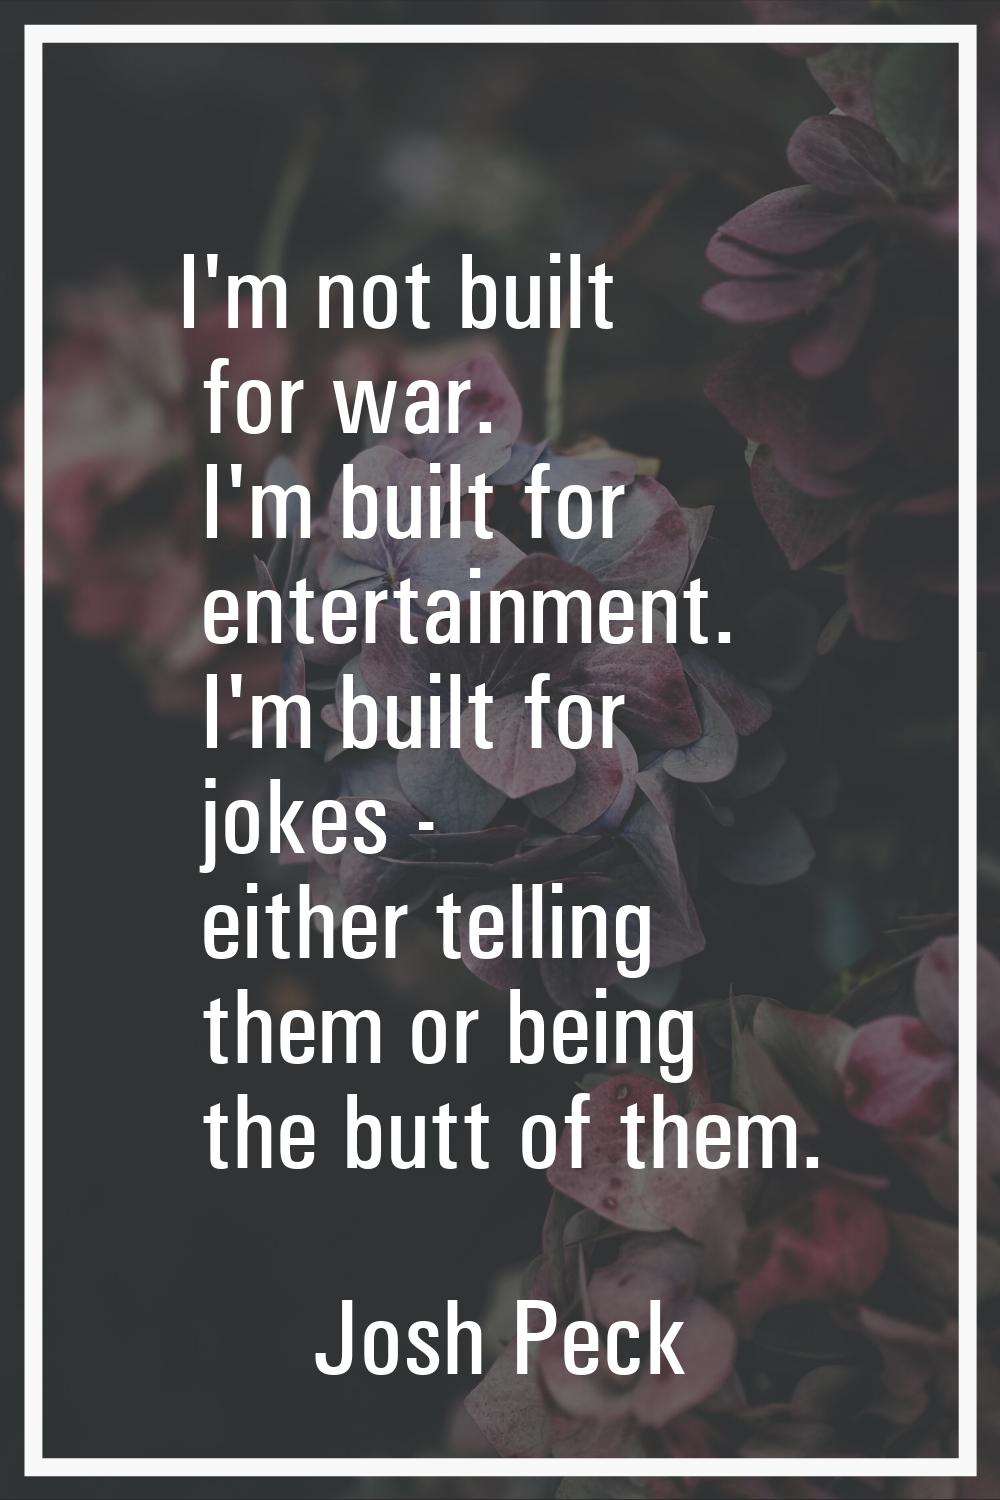 I'm not built for war. I'm built for entertainment. I'm built for jokes - either telling them or be